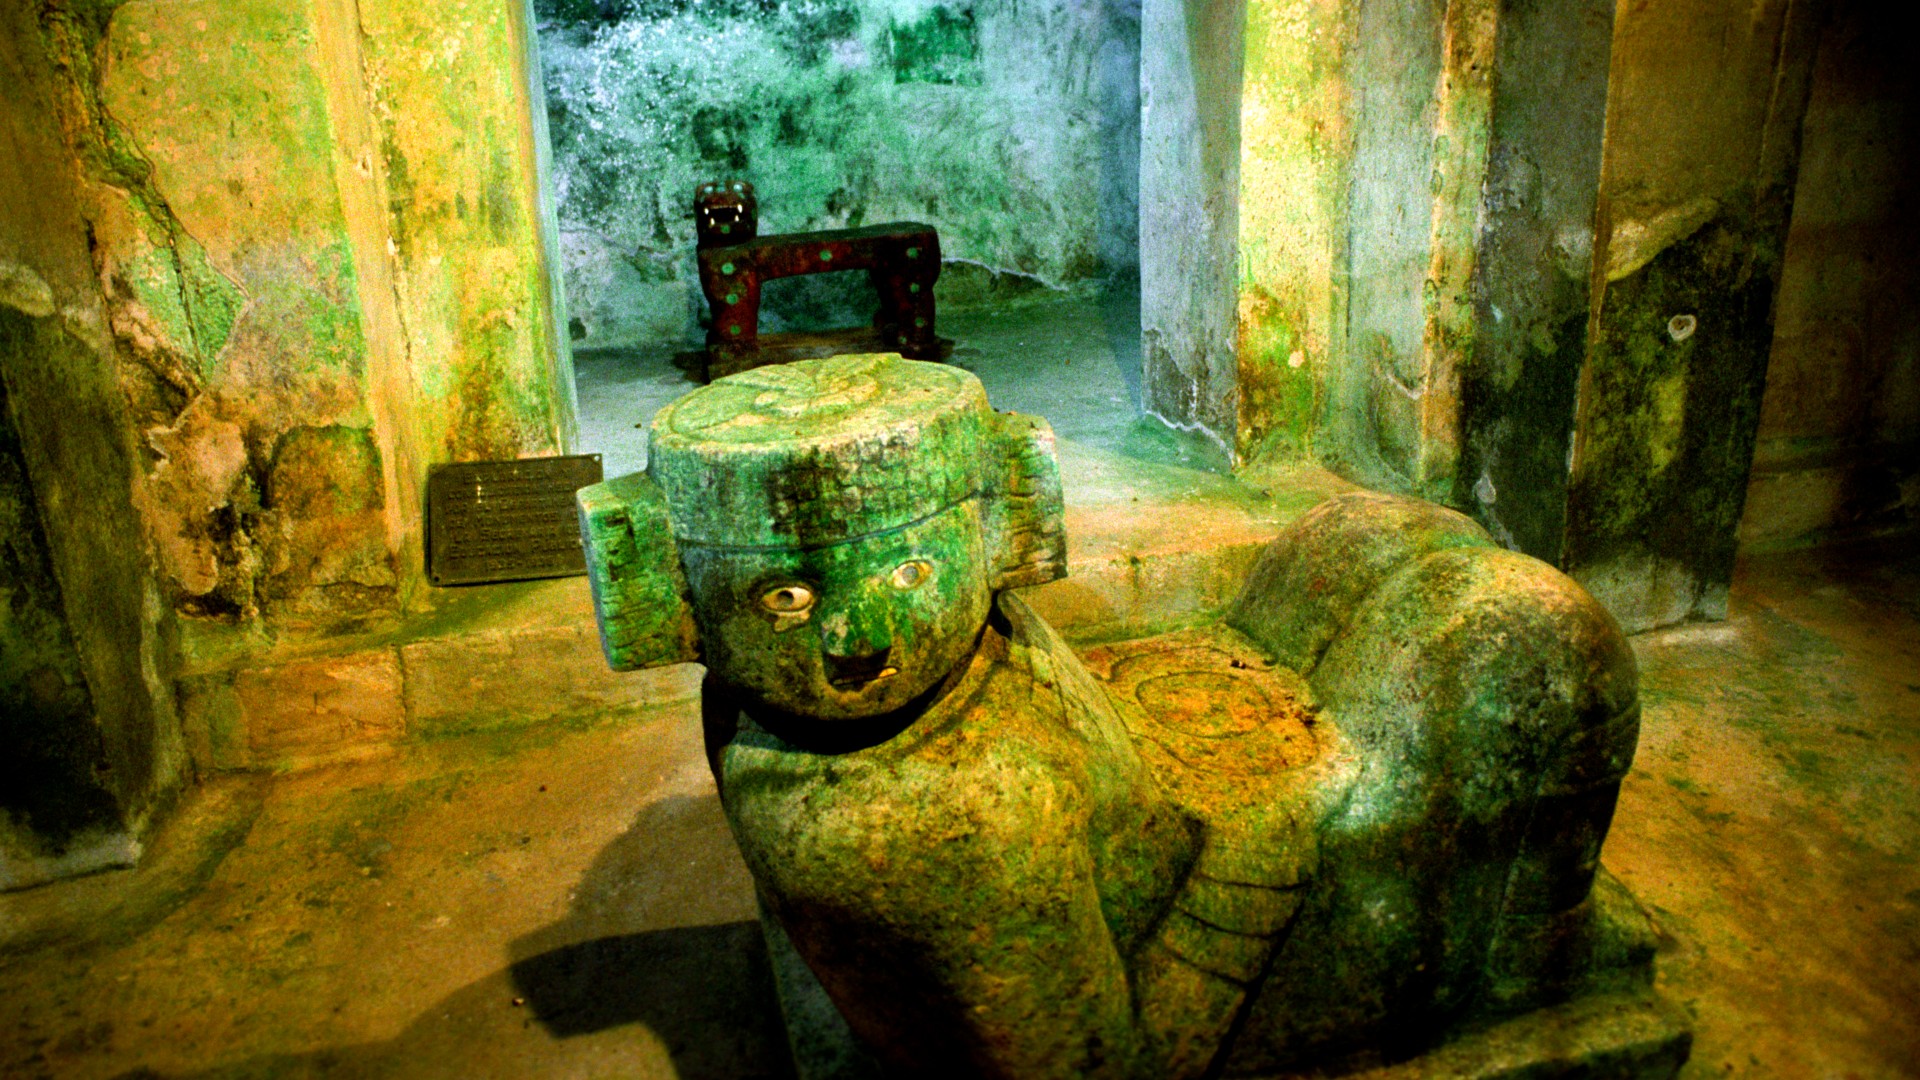 This photo shows the Jaguar Throne found inside the 